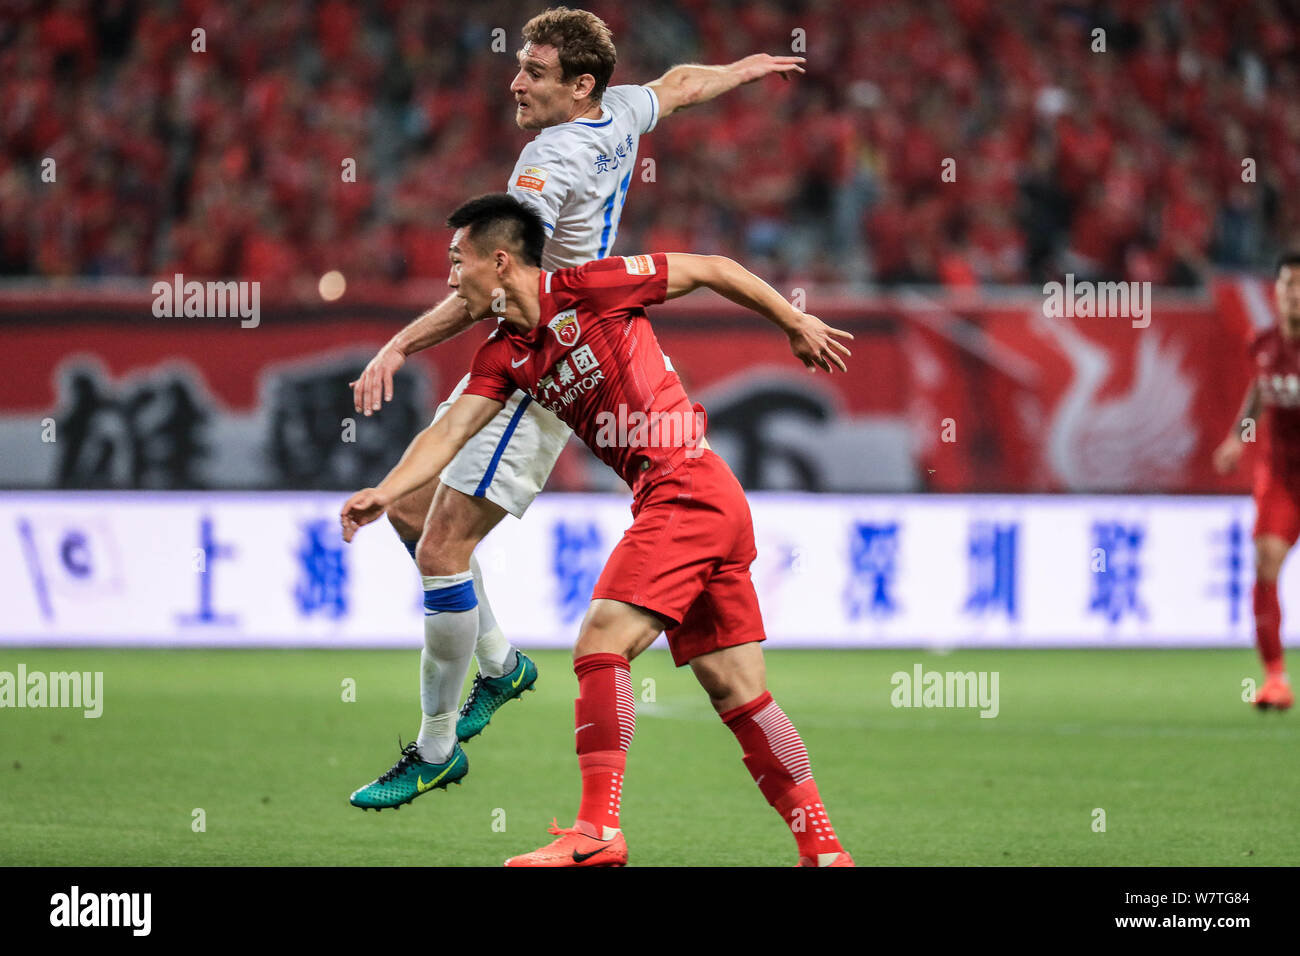 Australian football player Ryan McGowan, upper, of Guizhou Hengfeng Zhicheng, challenges with a football player of Shanghai SIPG in their 8th round ma Stock Photo